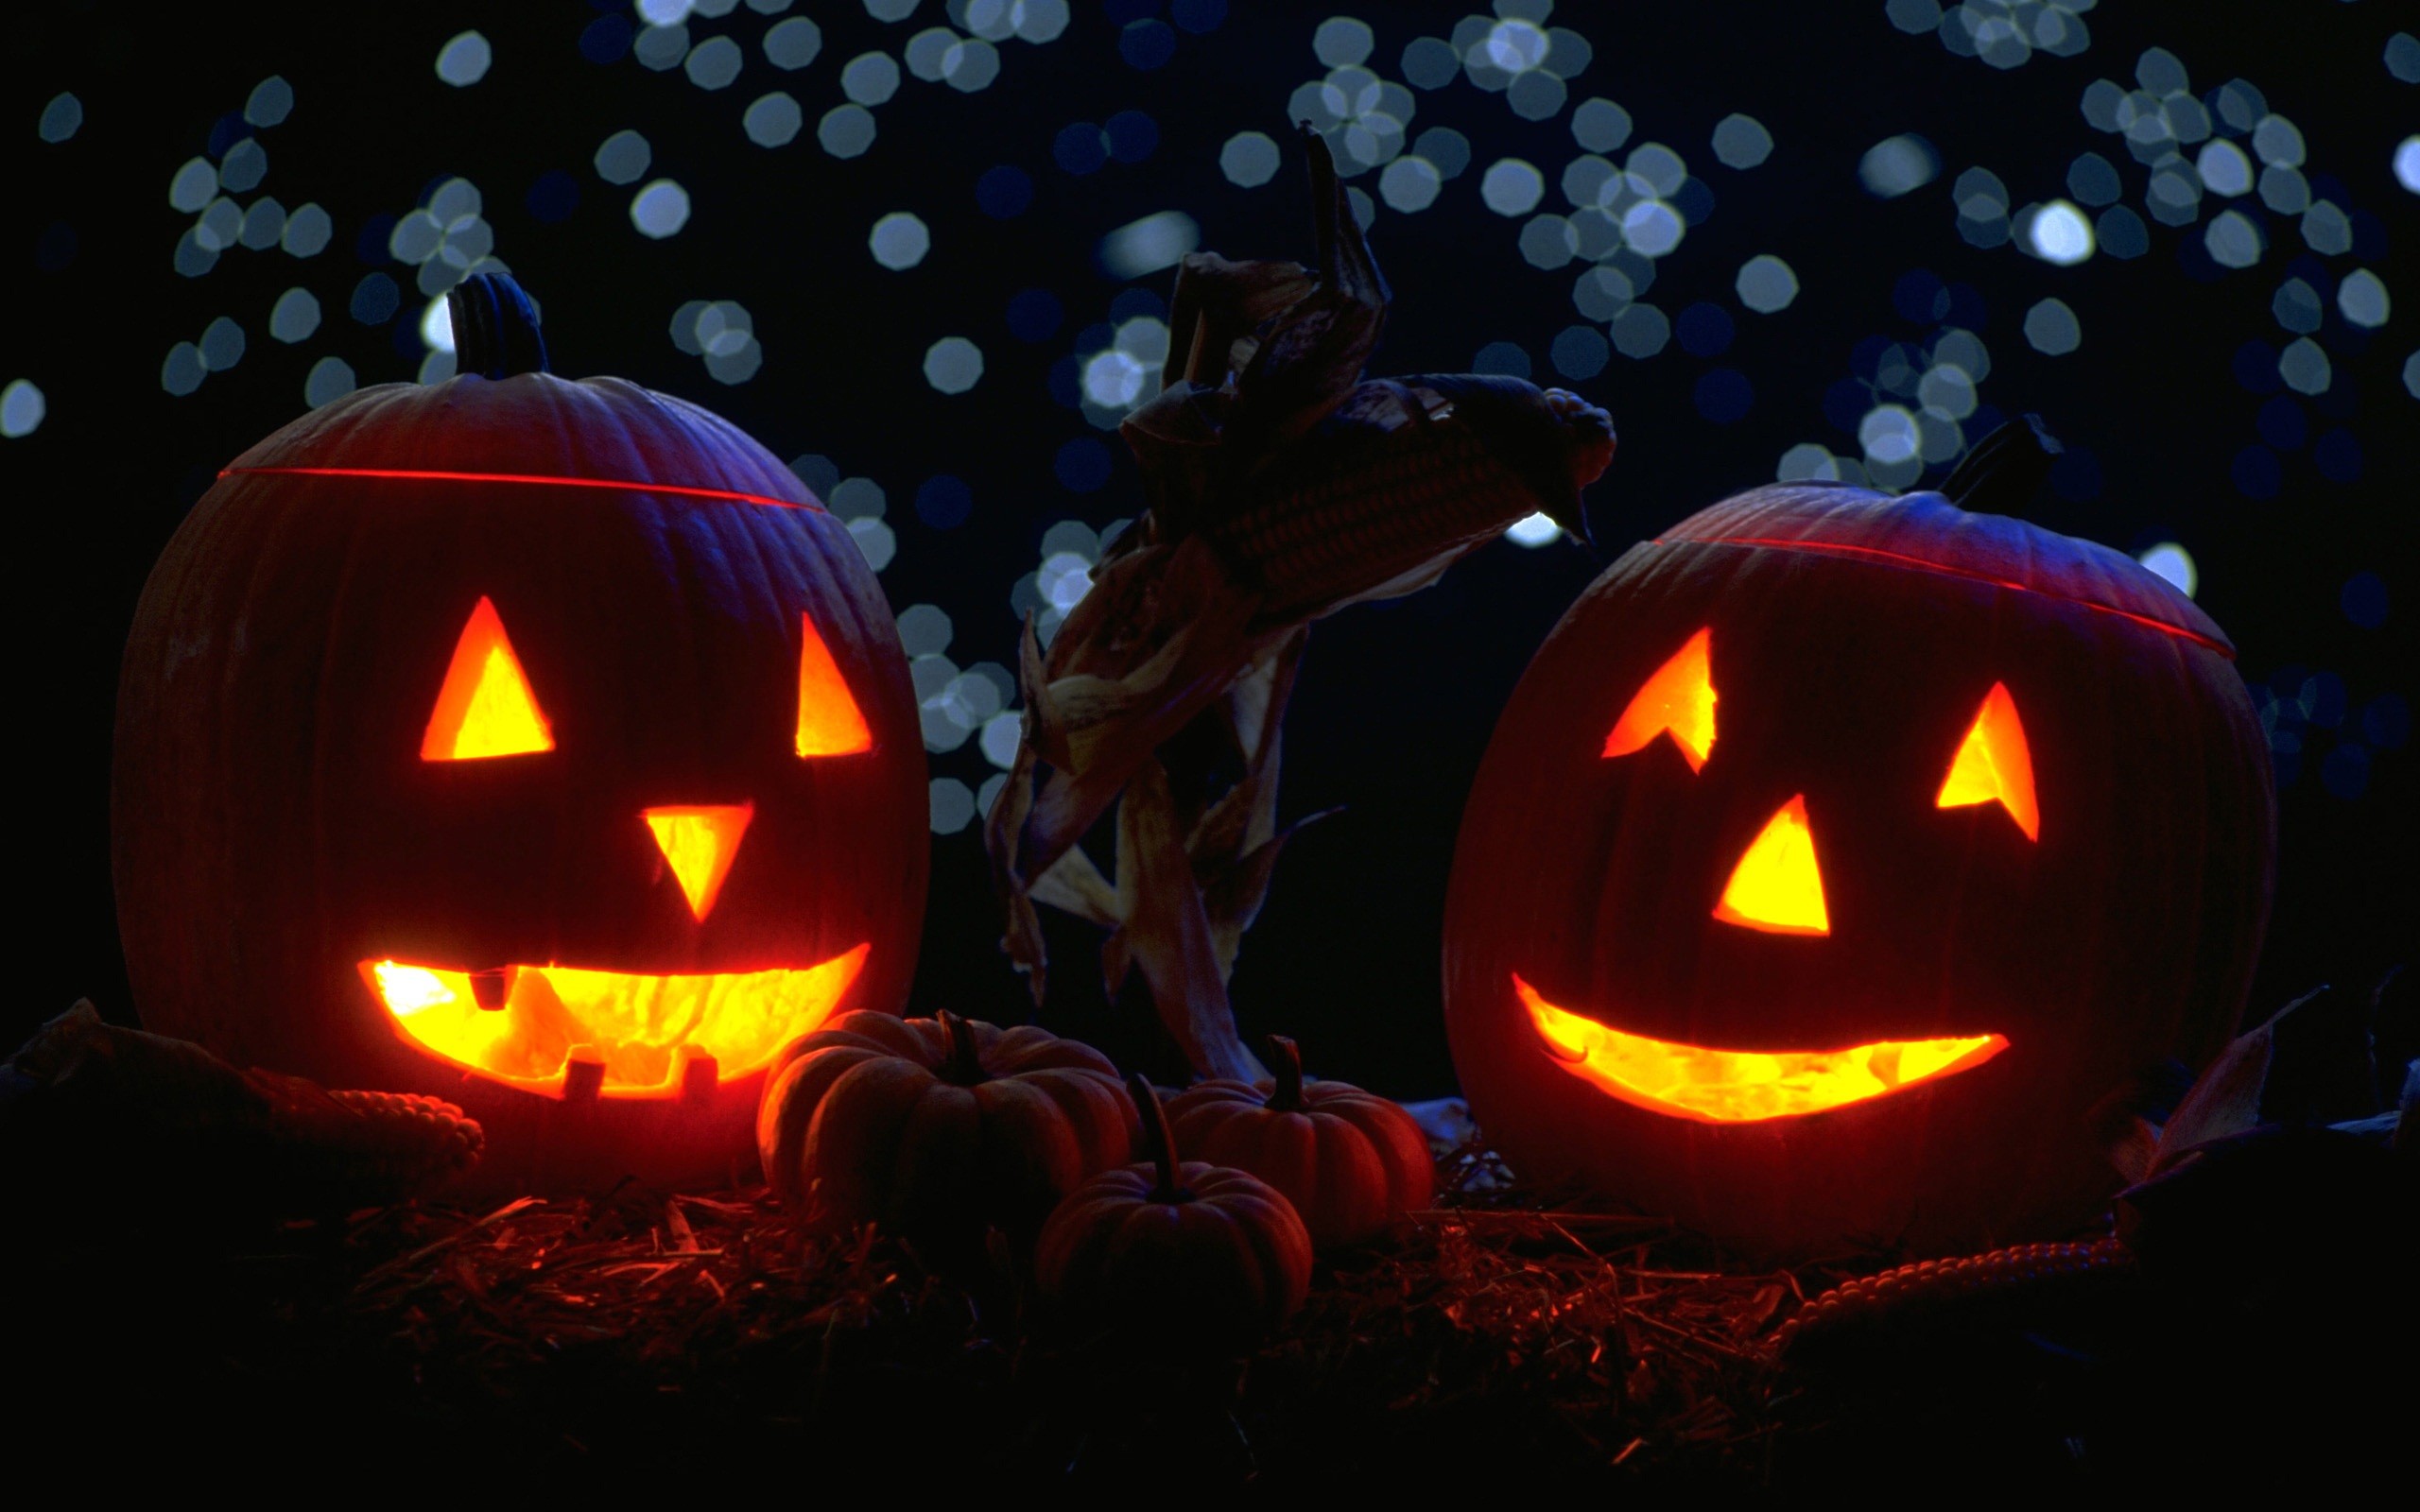 2560x1600 pumpkins with candles in the night halloween widescreen wallpapers ...  Pumpkins With Candles In The Night Halloween Widescreen Wallpapers